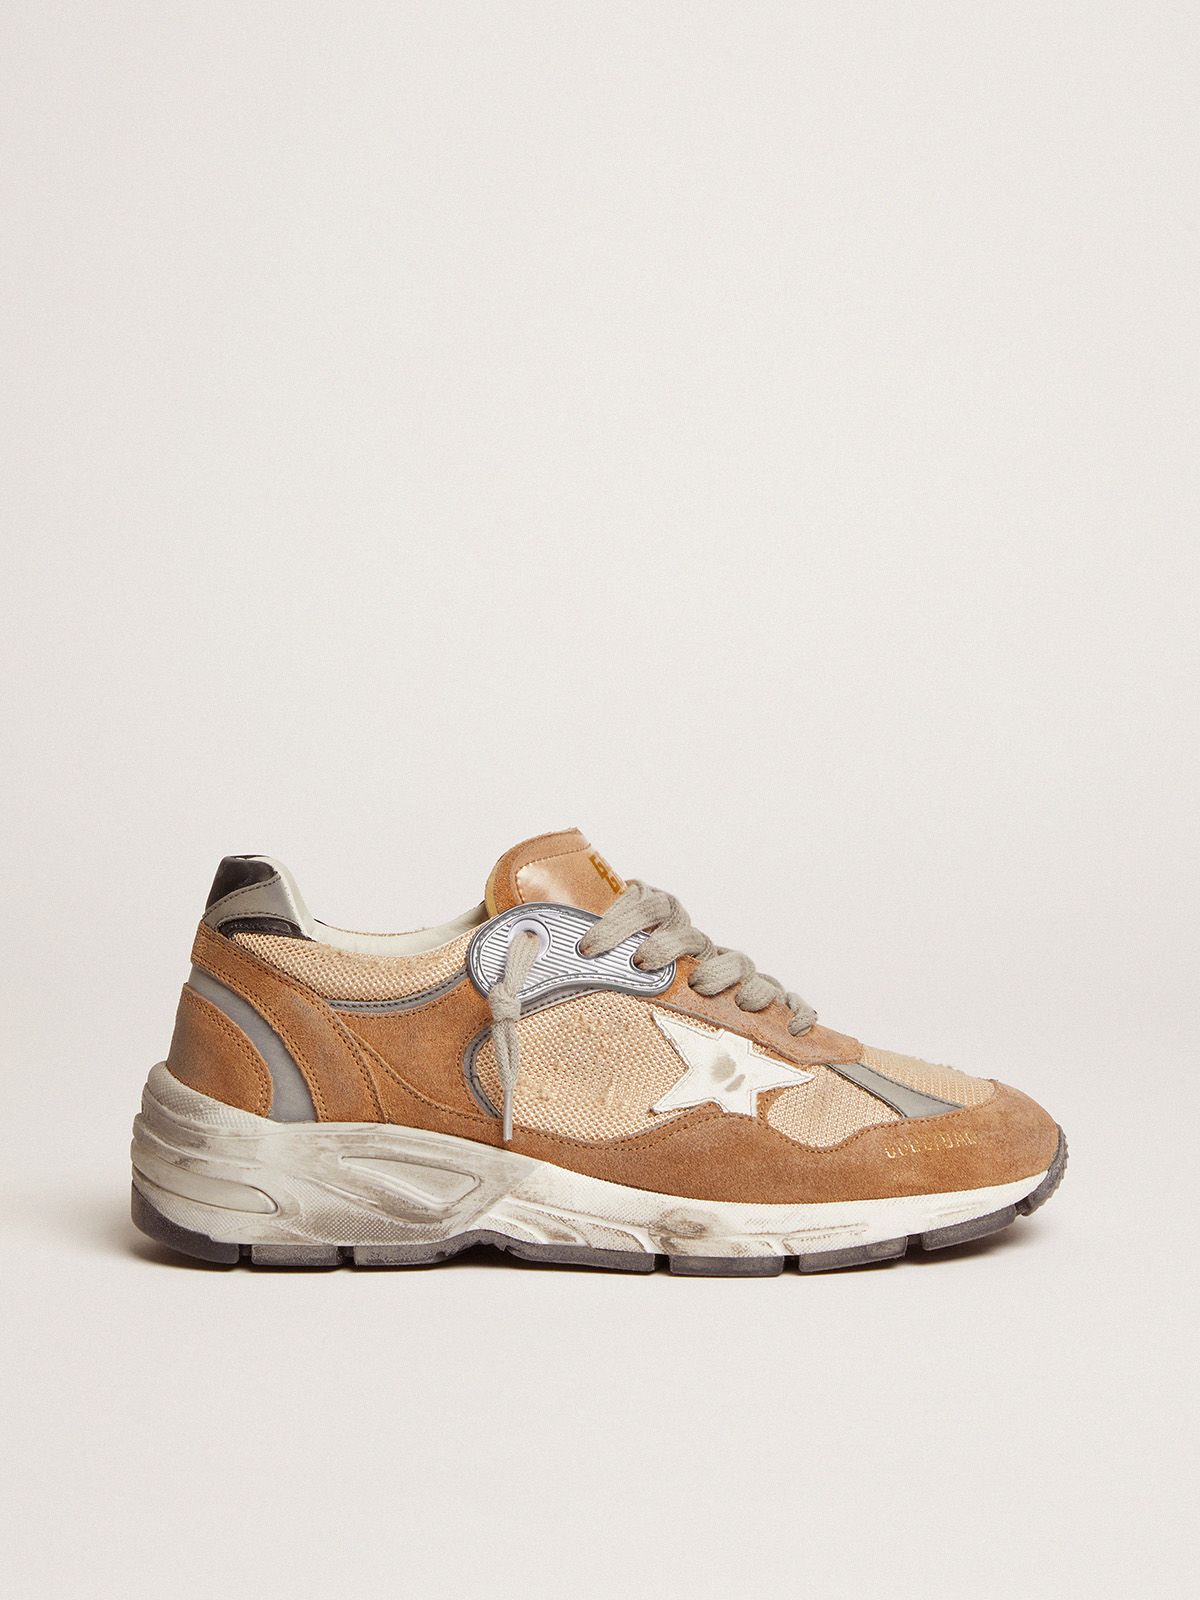 golden goose with tobacco-colored Dad-Star in star sneakers black leather heel mesh white and tab suede